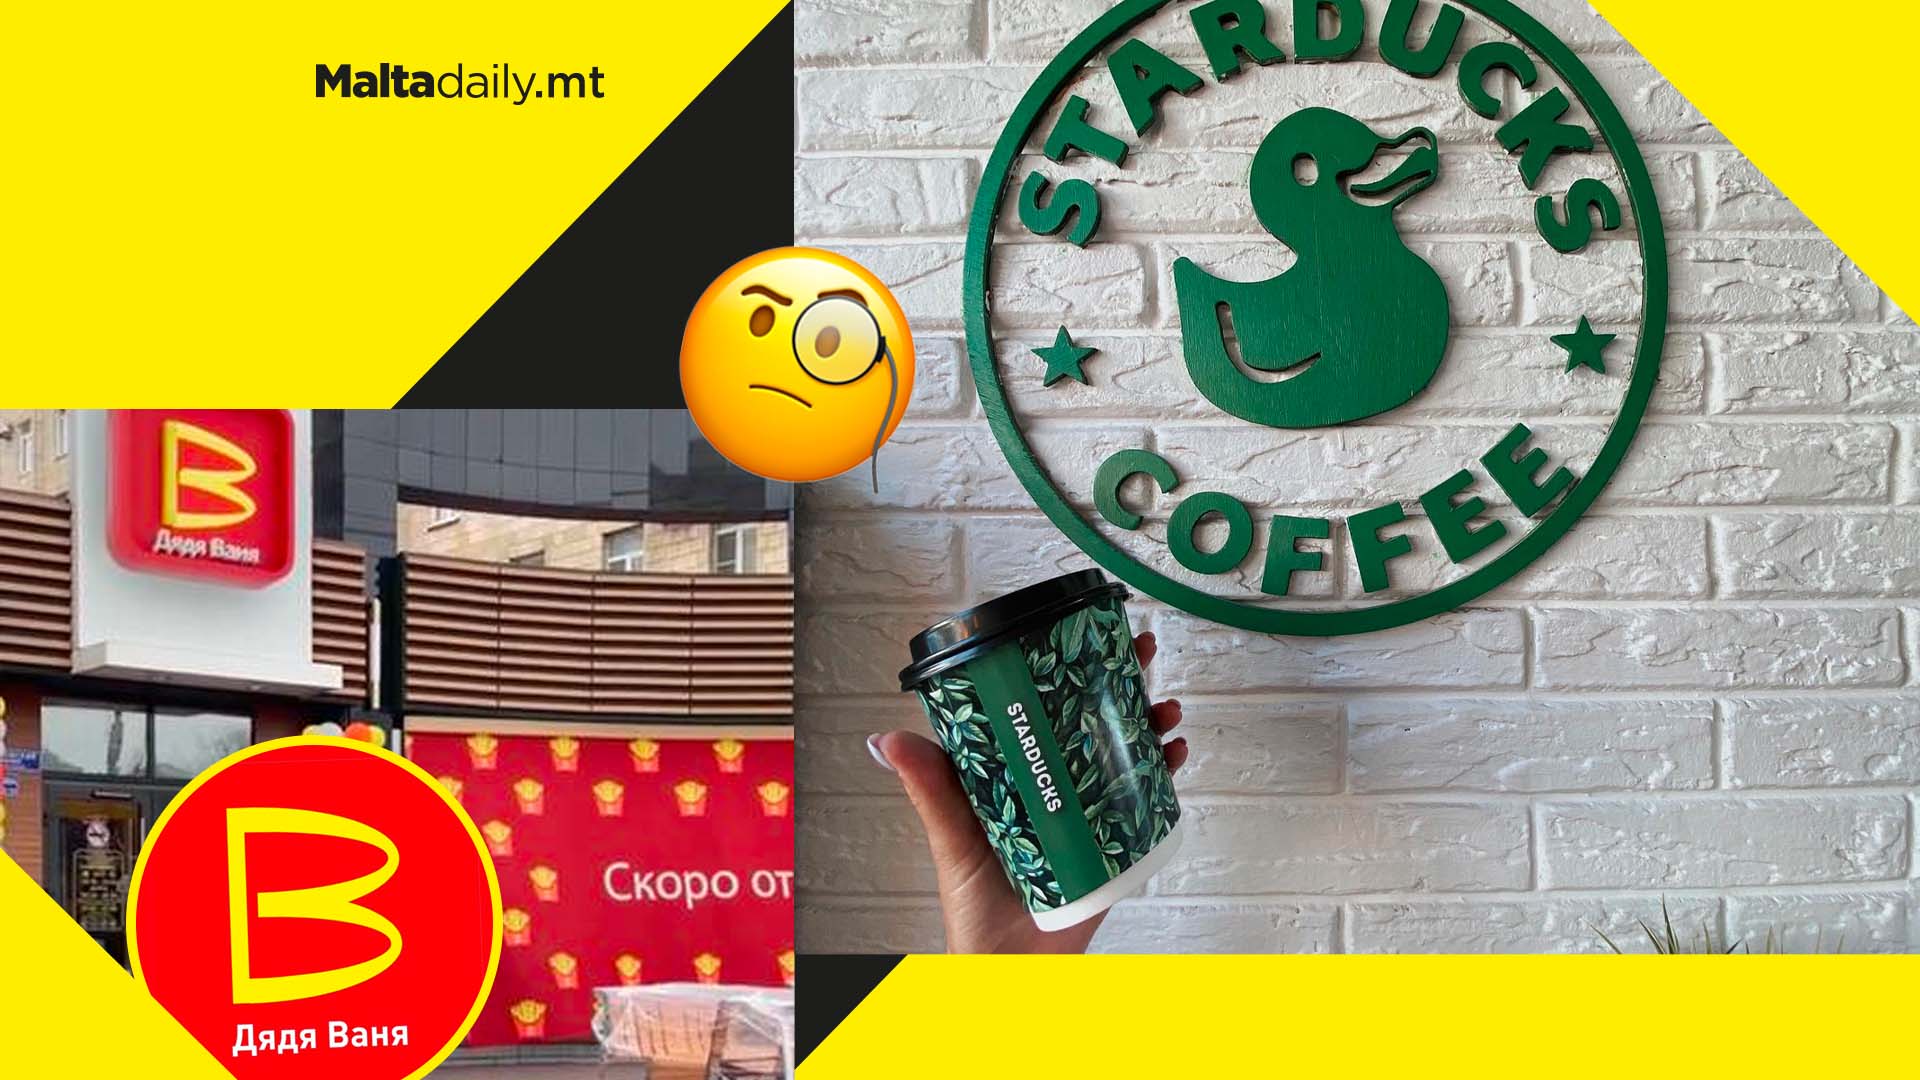 Russia opens McDonald's and Starbucks replacement and the logos are... questionable